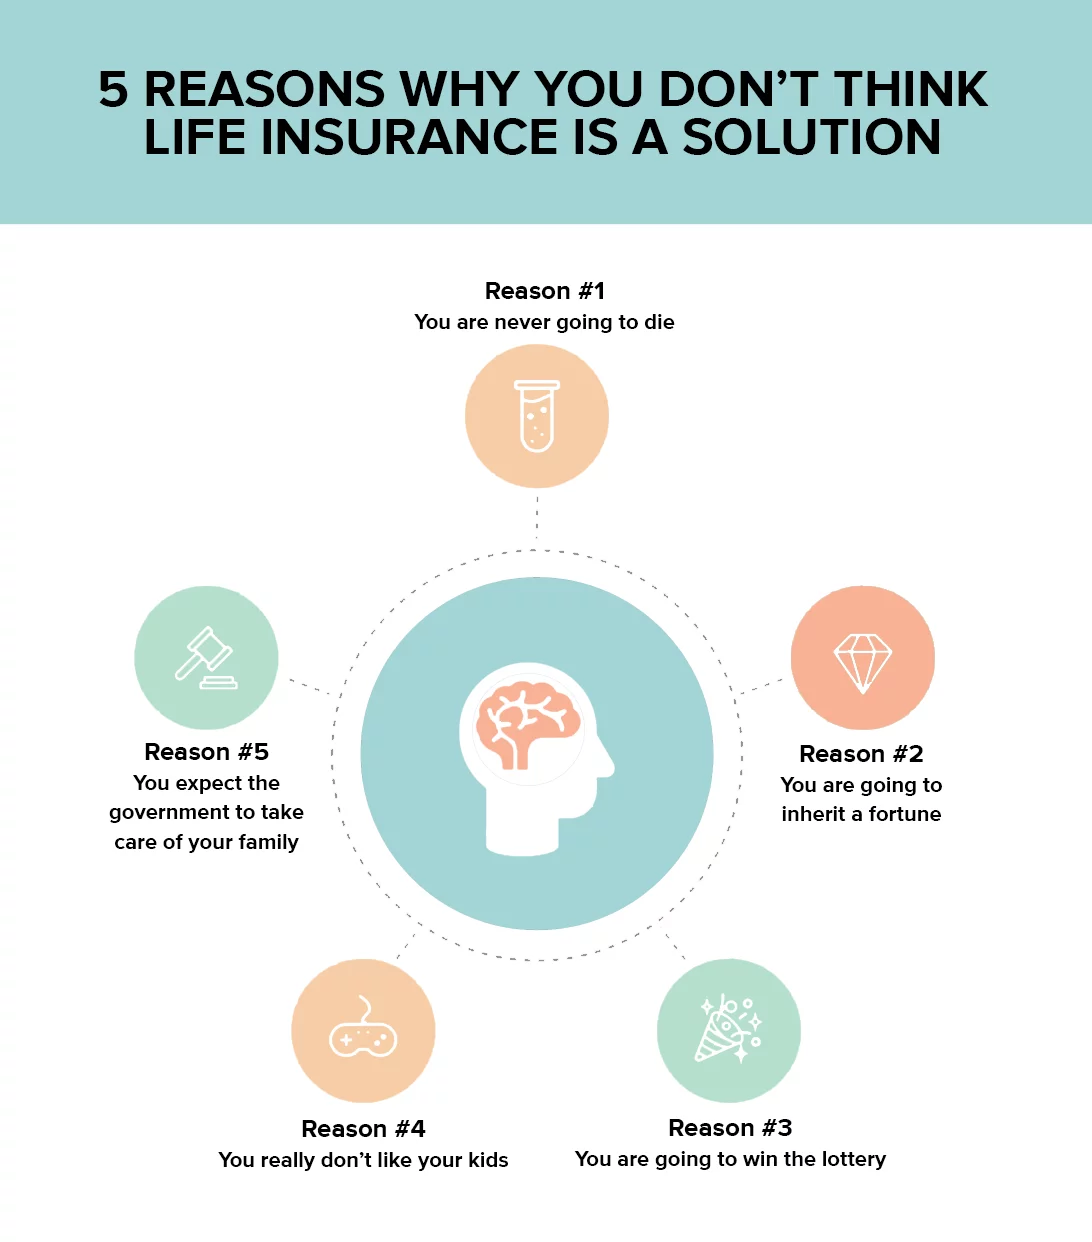 5 Reasons why you don't think life insurance is a solution